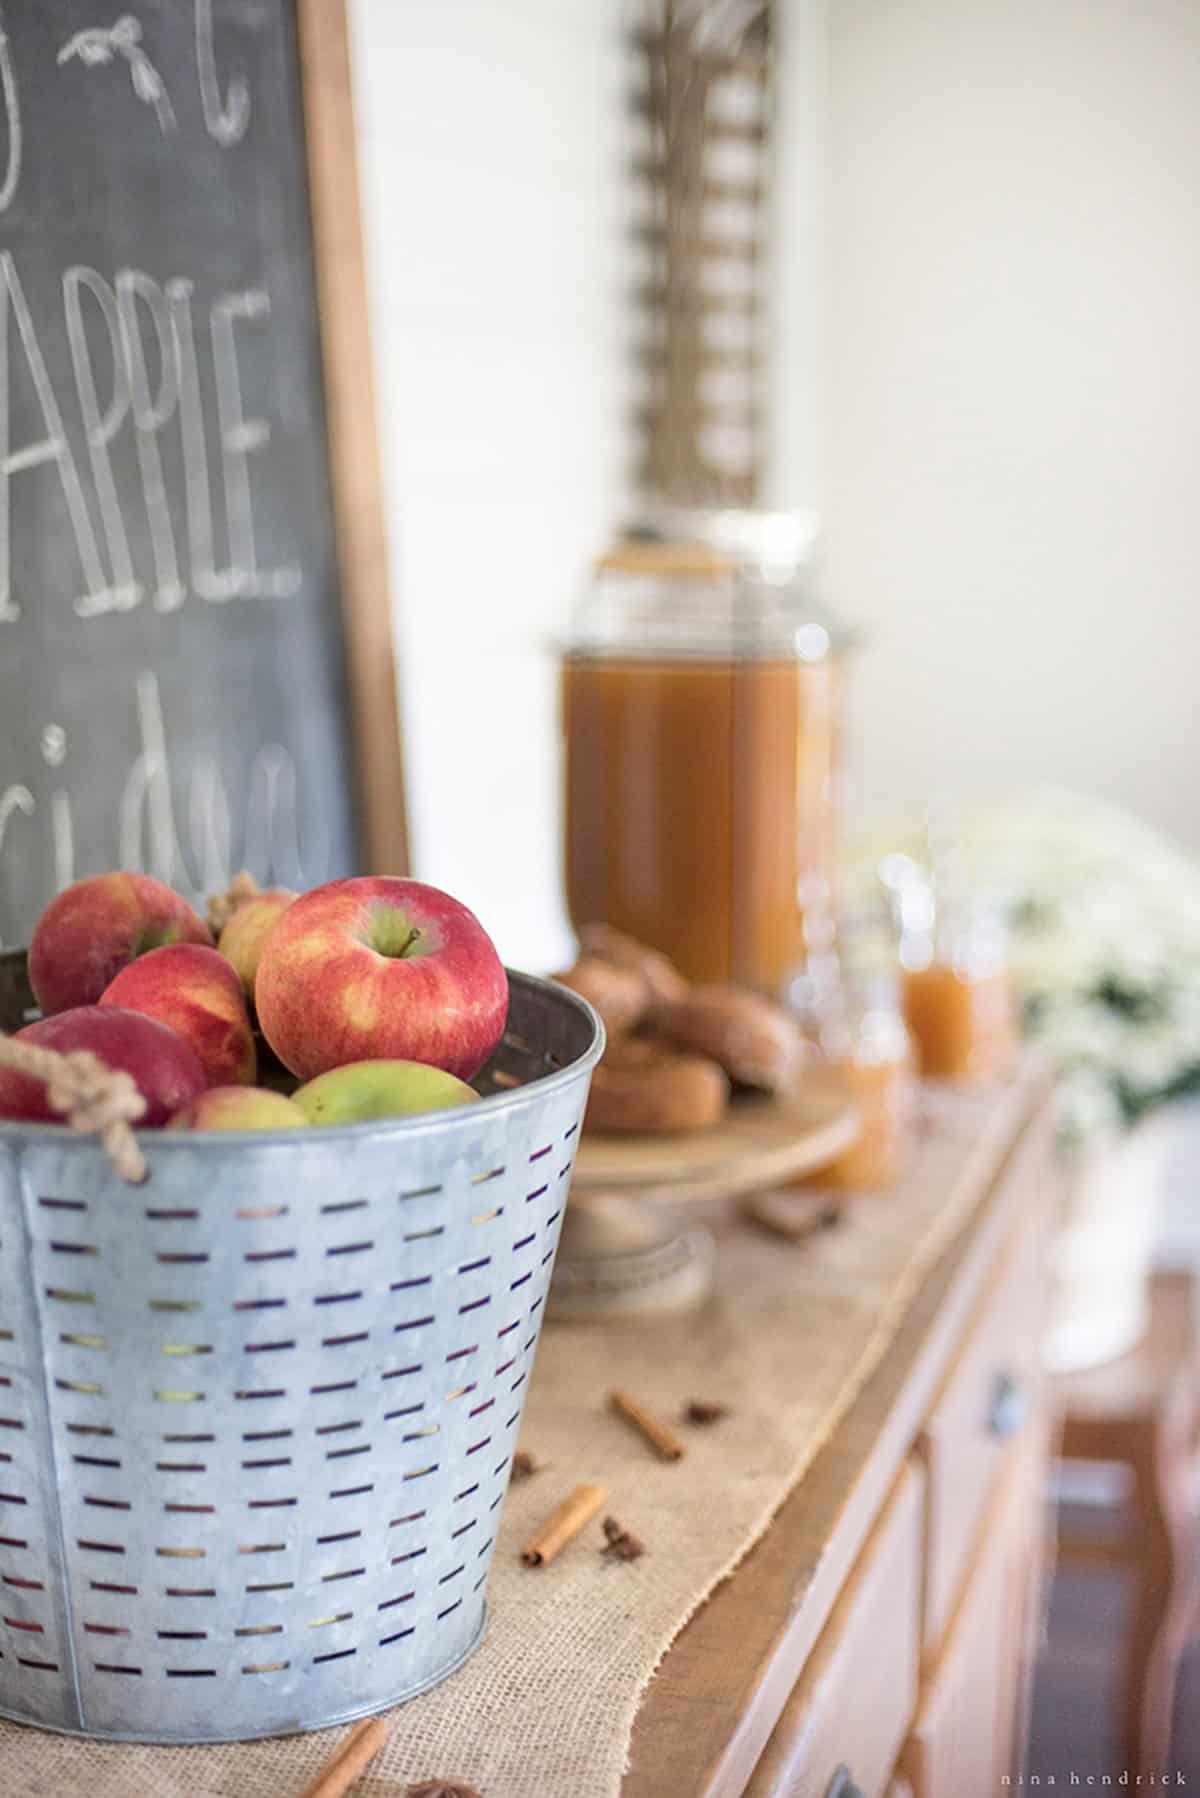 A galvanized bucket of apples on a table with desserts in the background.